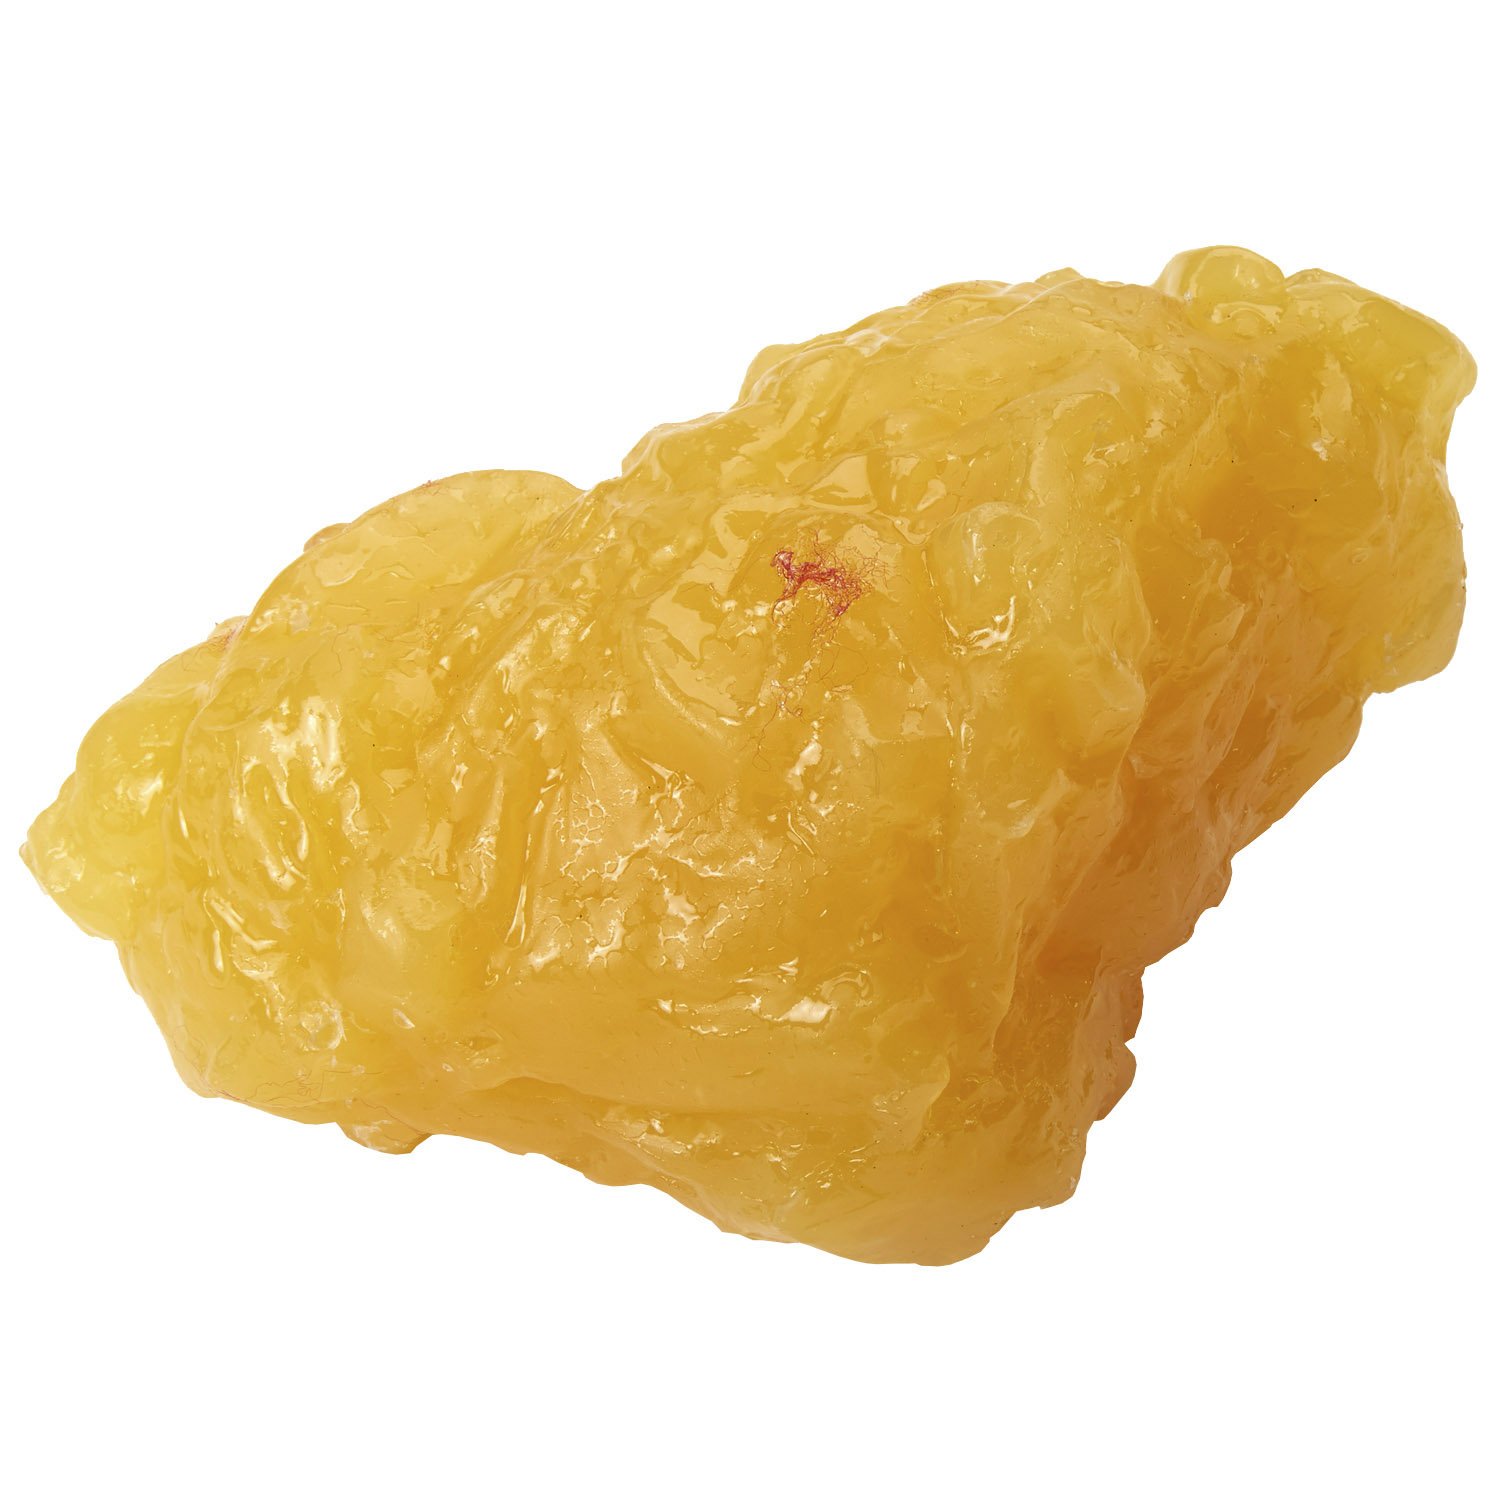 Our last and final product is a real life <a href="https://amzn.to/2mEVIDc" target="_blank"><strong>Human Fat Replica</strong></a>. This 5lb fat blob could be a good doorstopper or maybe even a paper weight, really whatever you can think of. So if you already feel bad about being over weight, maybe what you need is a physical totem to look at and feel shamed. 